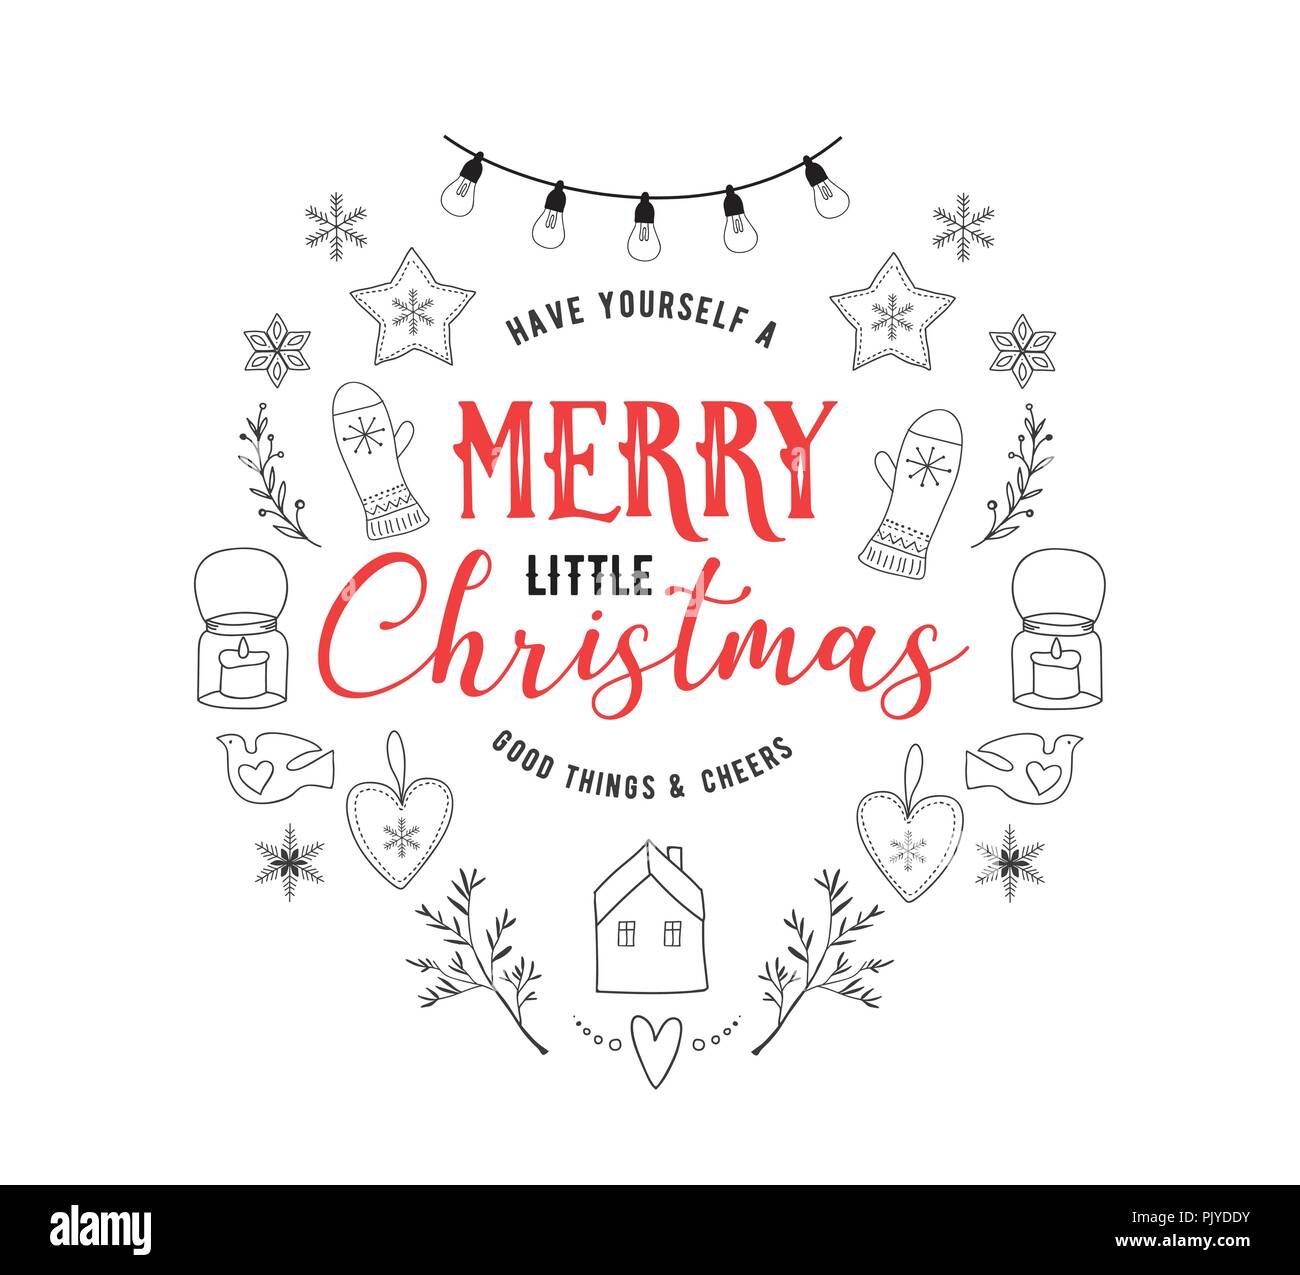 Scandinavian style, simple and stylish Merry Christmas greeting ...